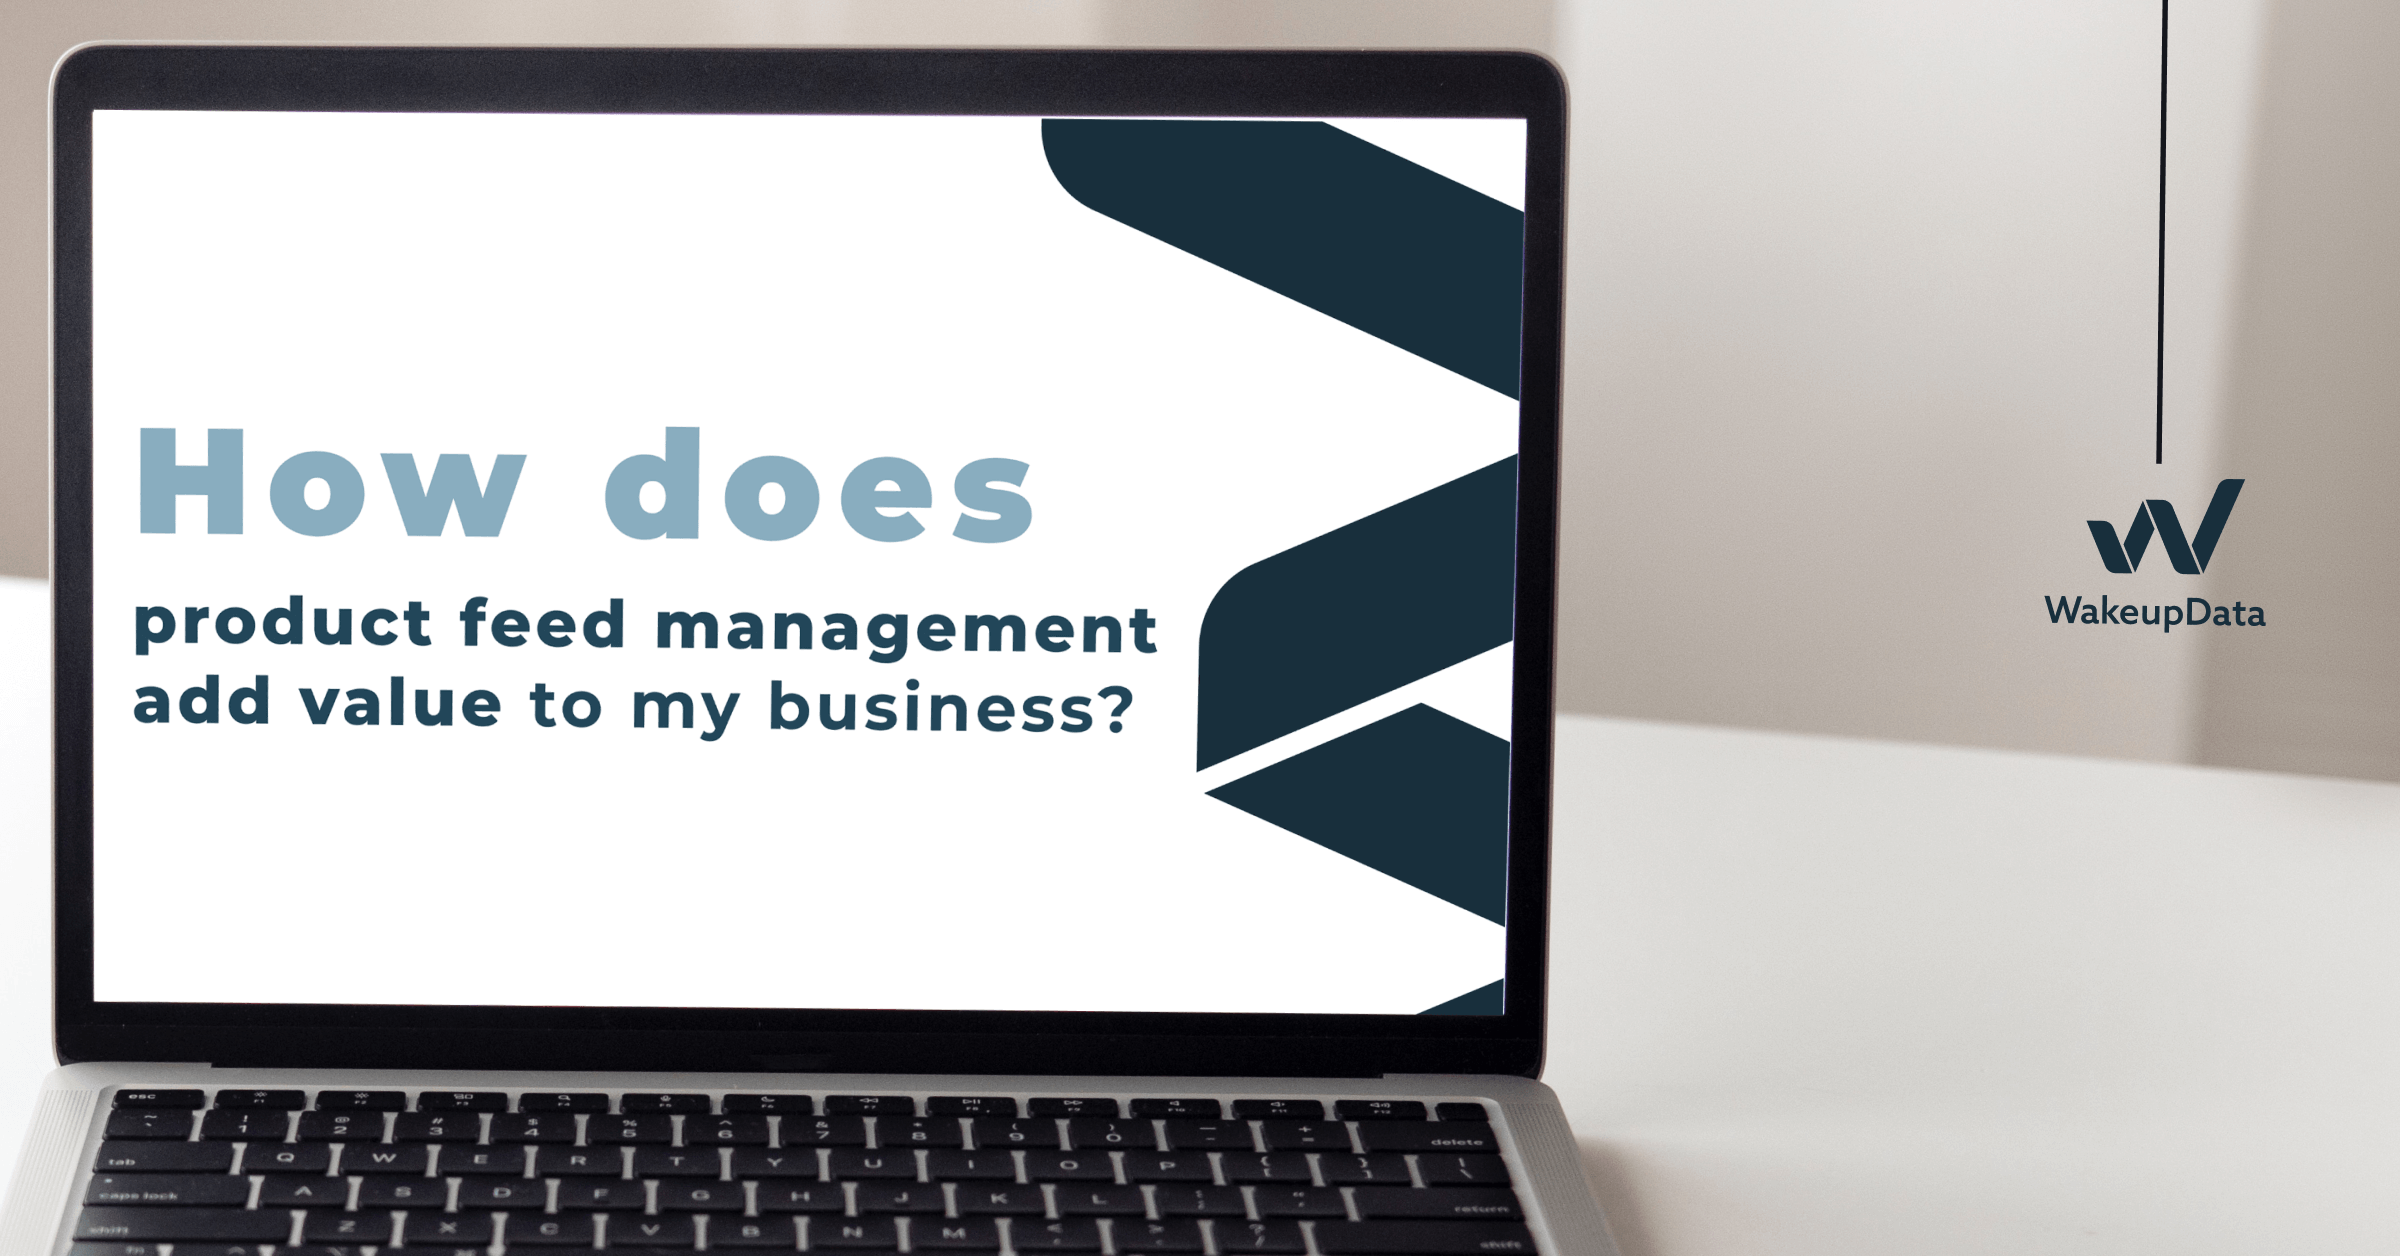 How does product feed management add value to my business?